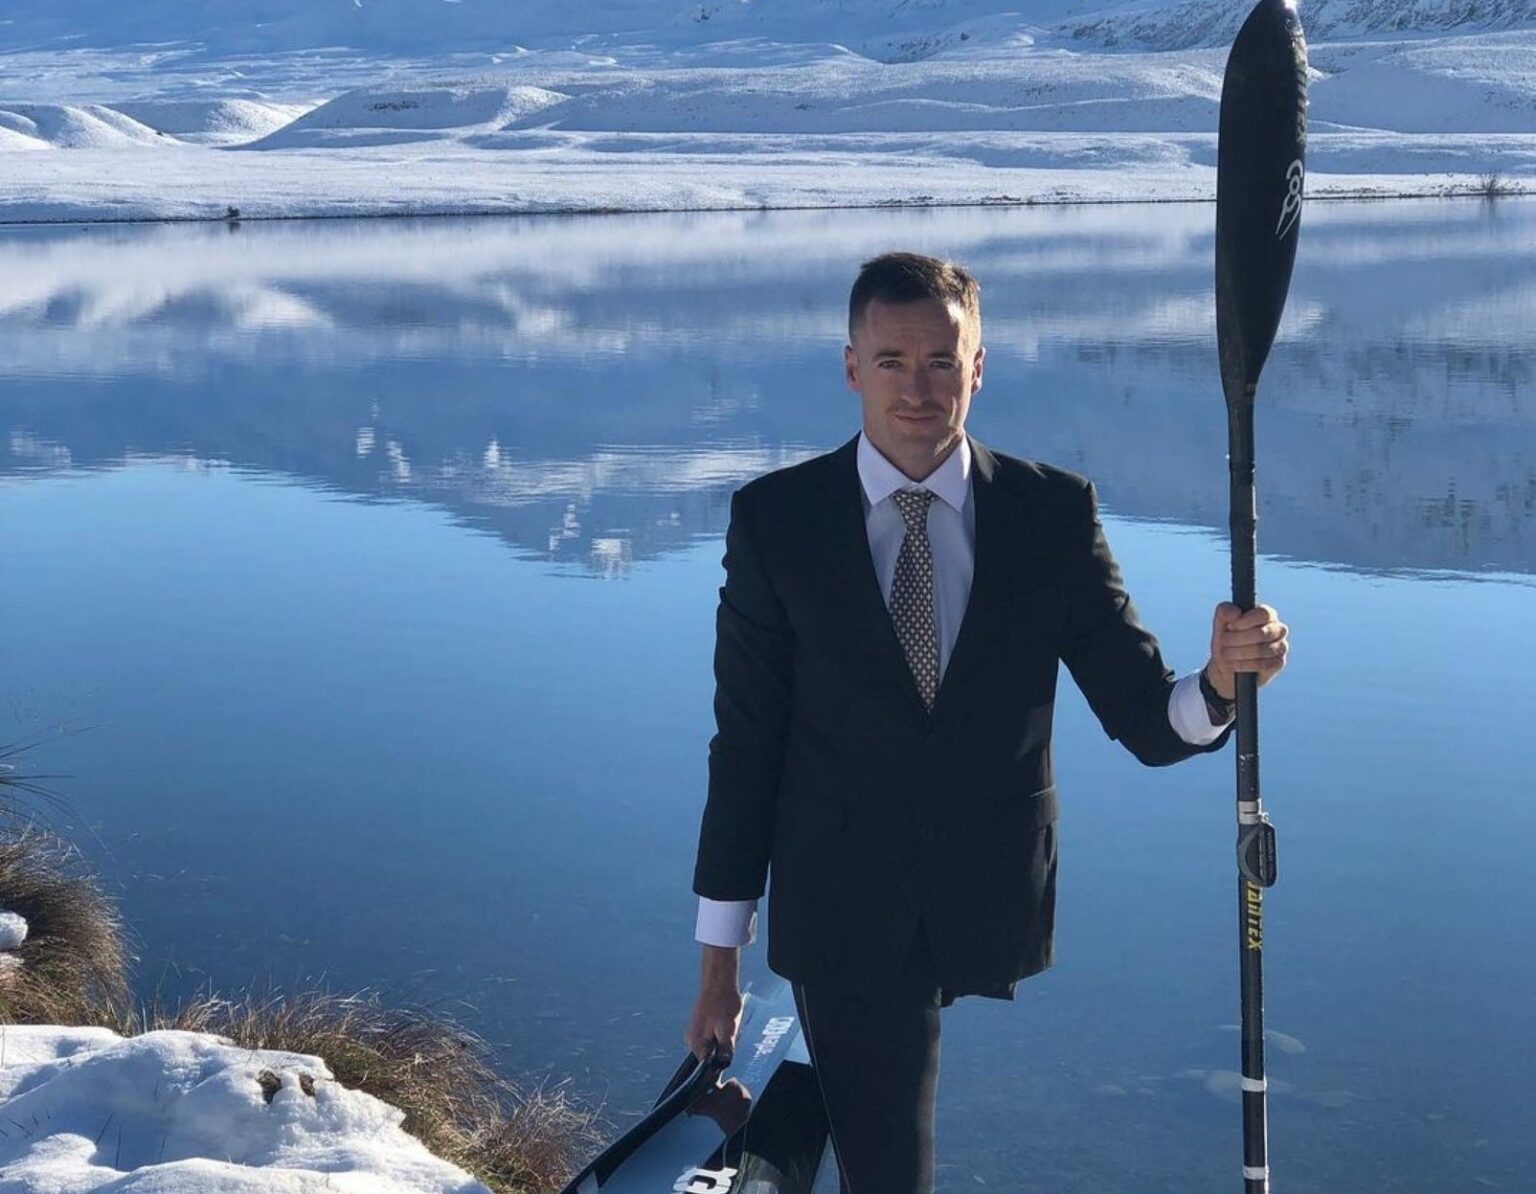 Scott Martlew in business suit holding his canoe and paddle in front of snowy lake